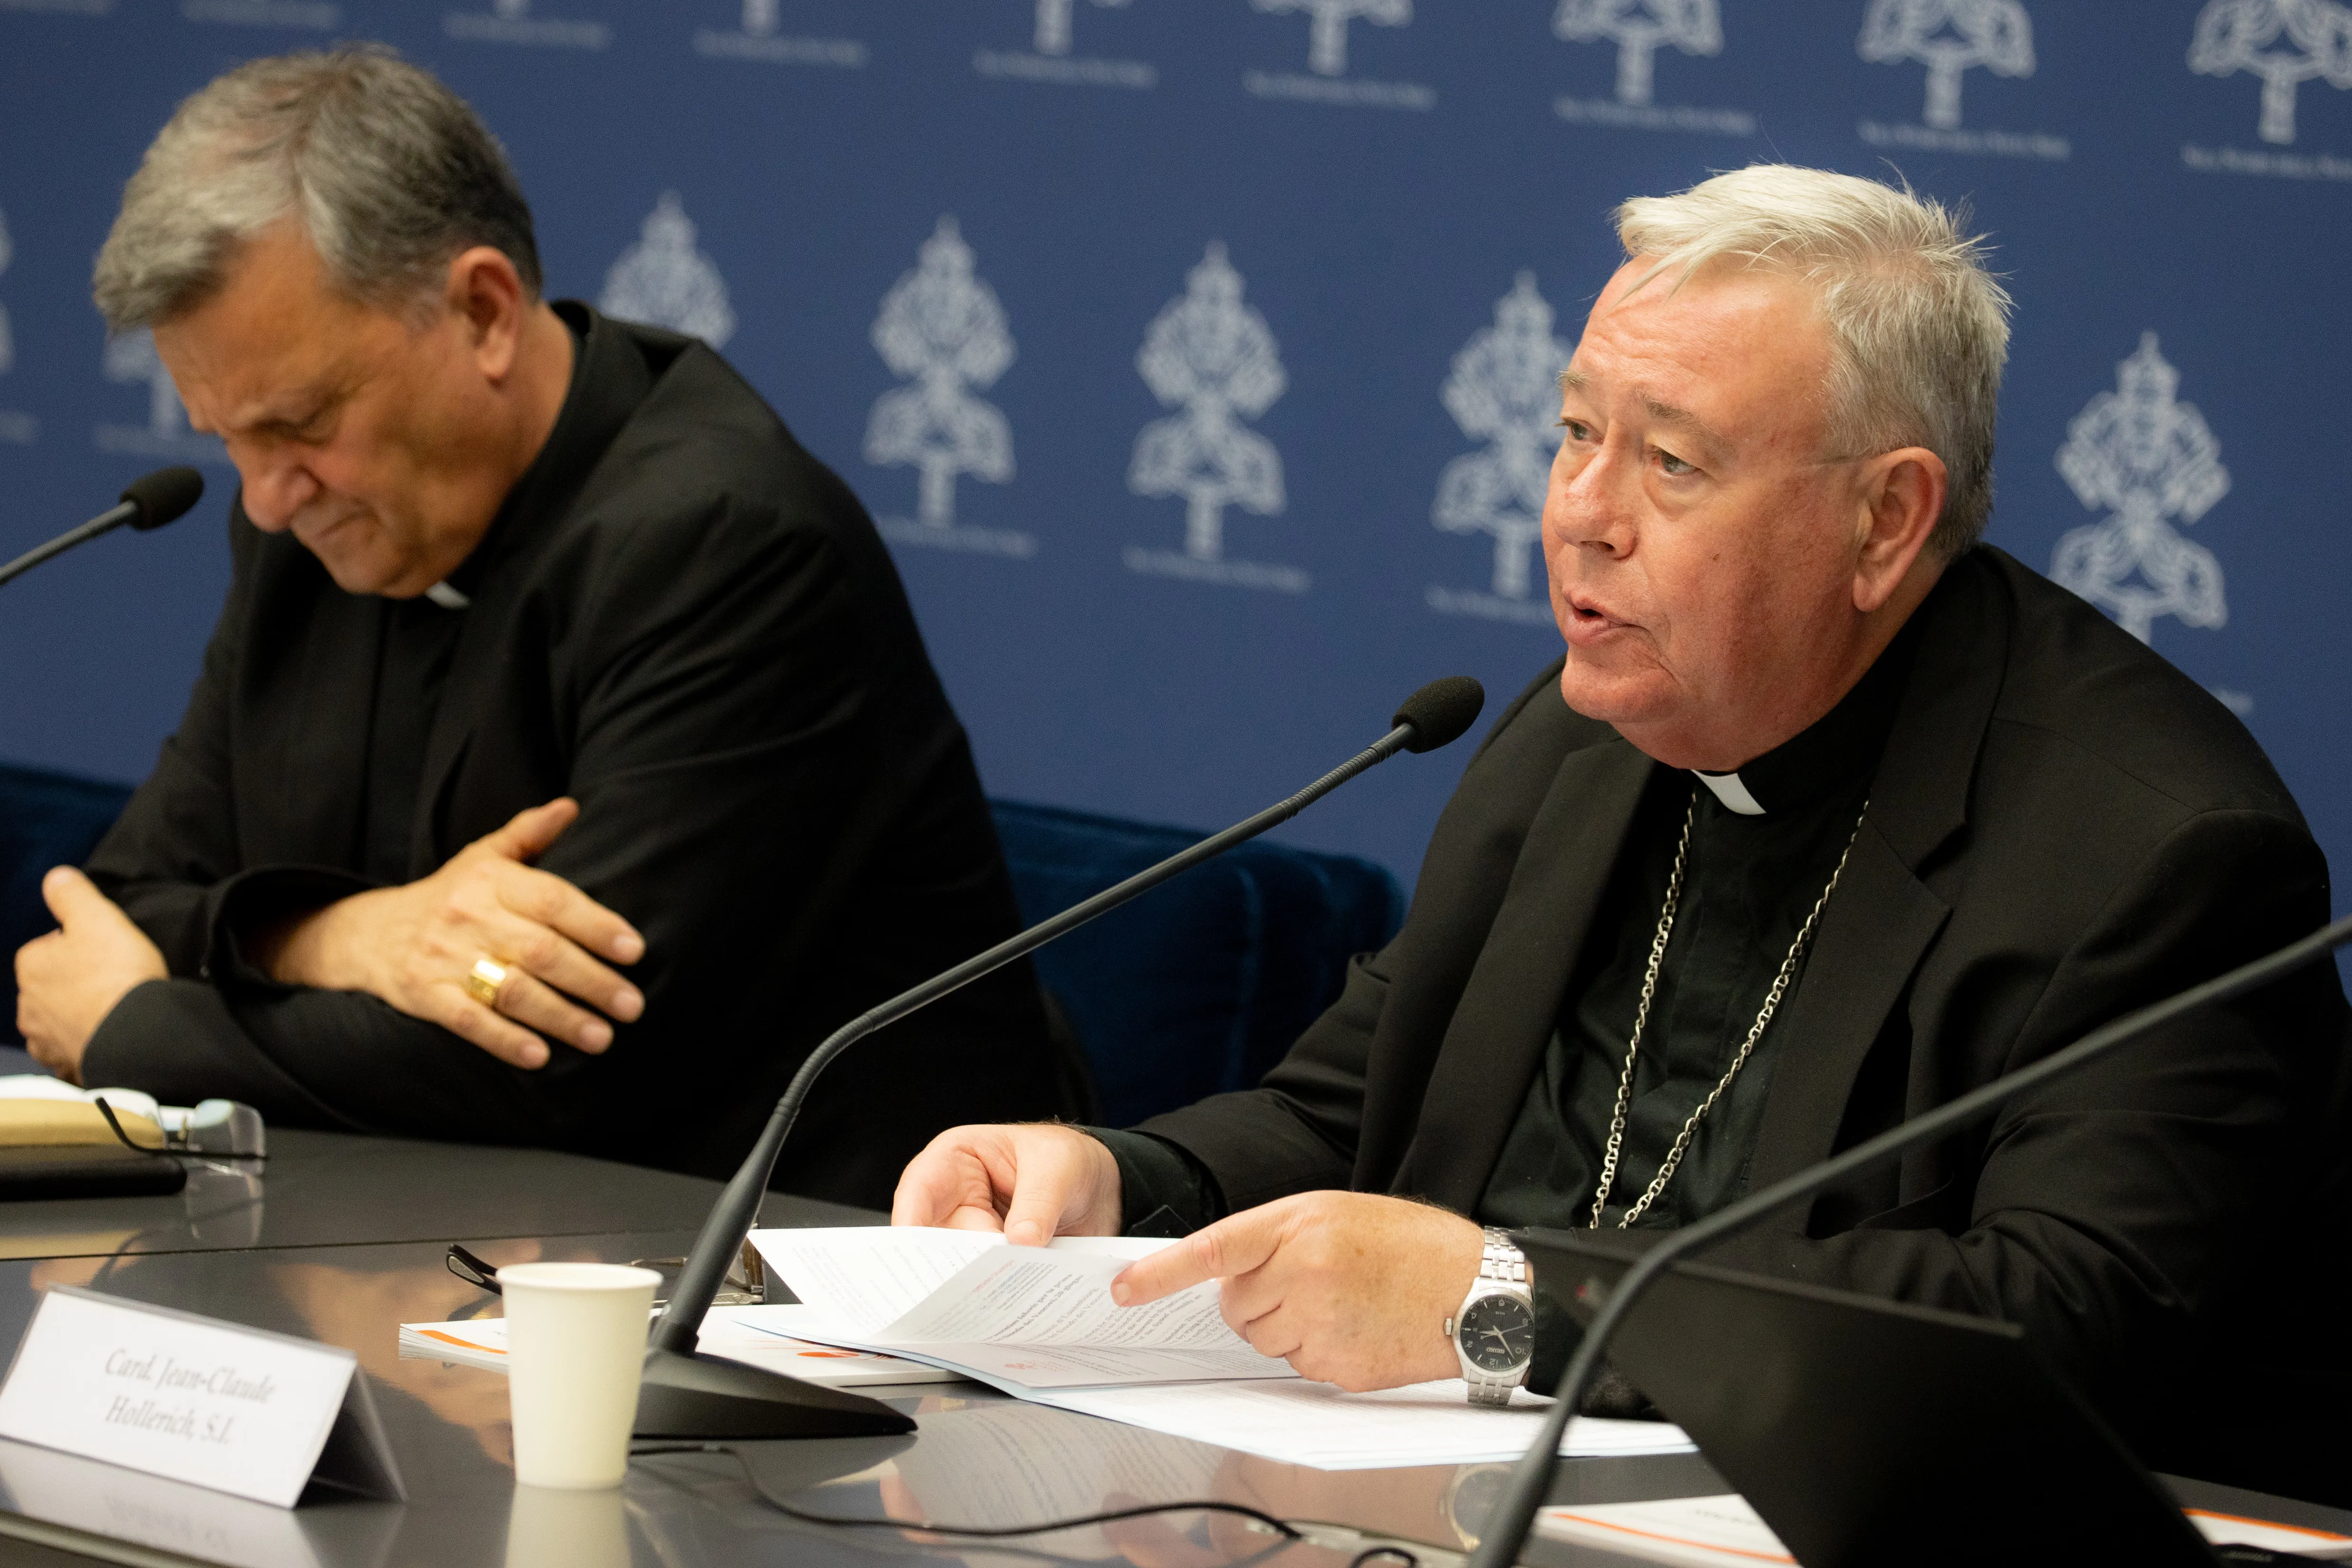 Cardinal Jean-Claude Hollerich (right), relator general of Synod on Synodality, speaks to the media on June 20, 2023, at the temporary headquarters of the Holy See Press Office in Vatican City. Beside him is Cardinal Mario Grech, the Secretary General for the Synod of Bishops.?w=200&h=150